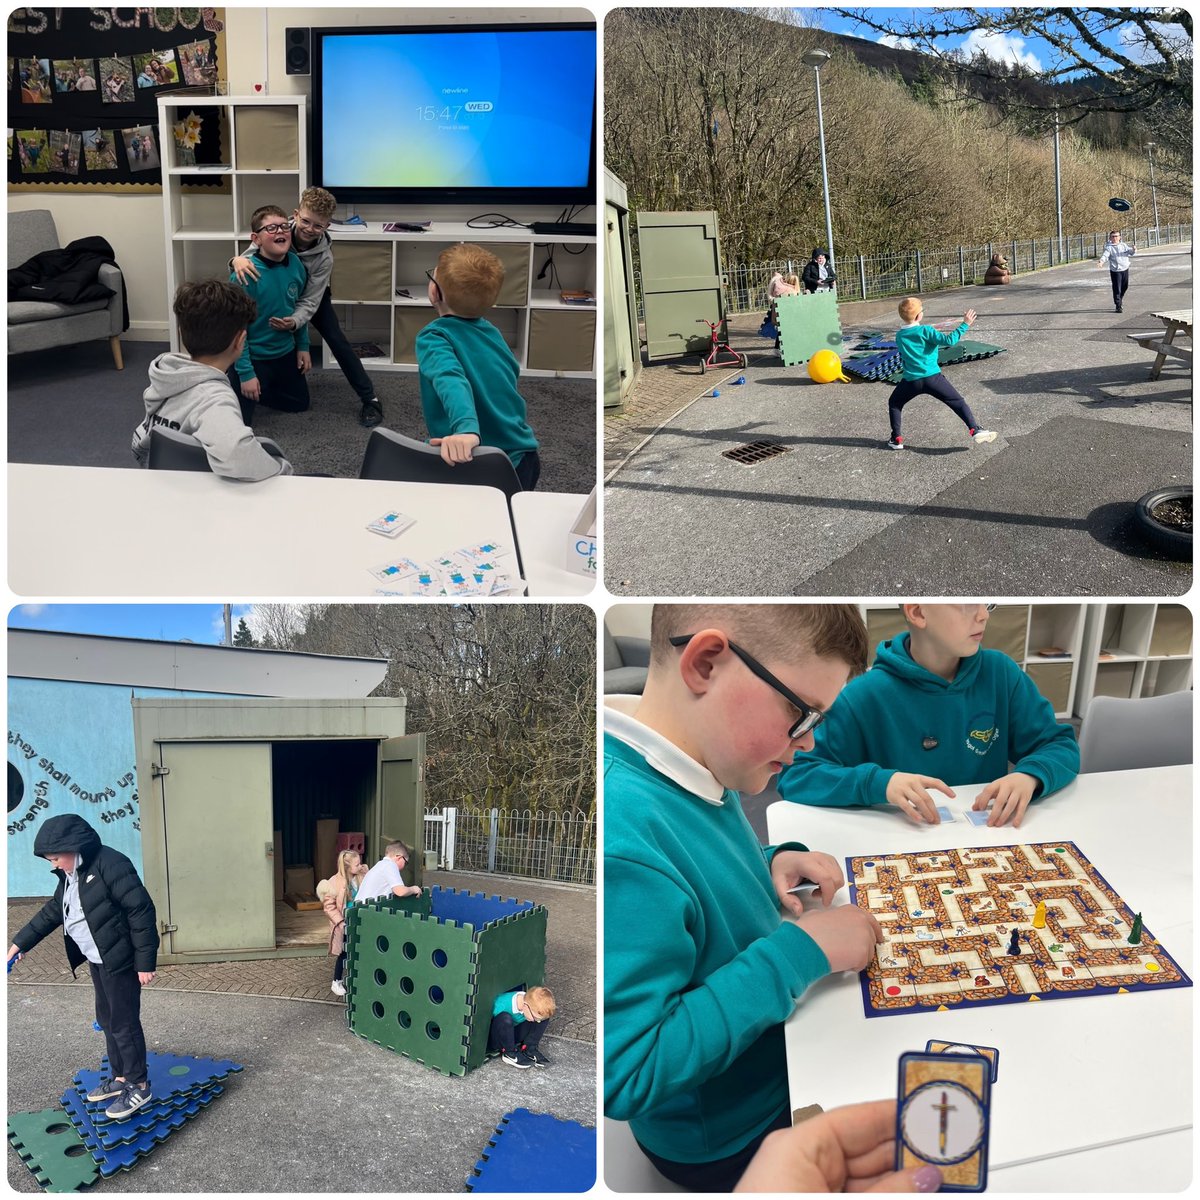 Some photos for our Stay and play sessions our Student leadership team have run over the past few weeks! It’s been great seeing the children utilise the schools grounds and equipment out of school time. @OVPS_Pinches #UNCRC #article13